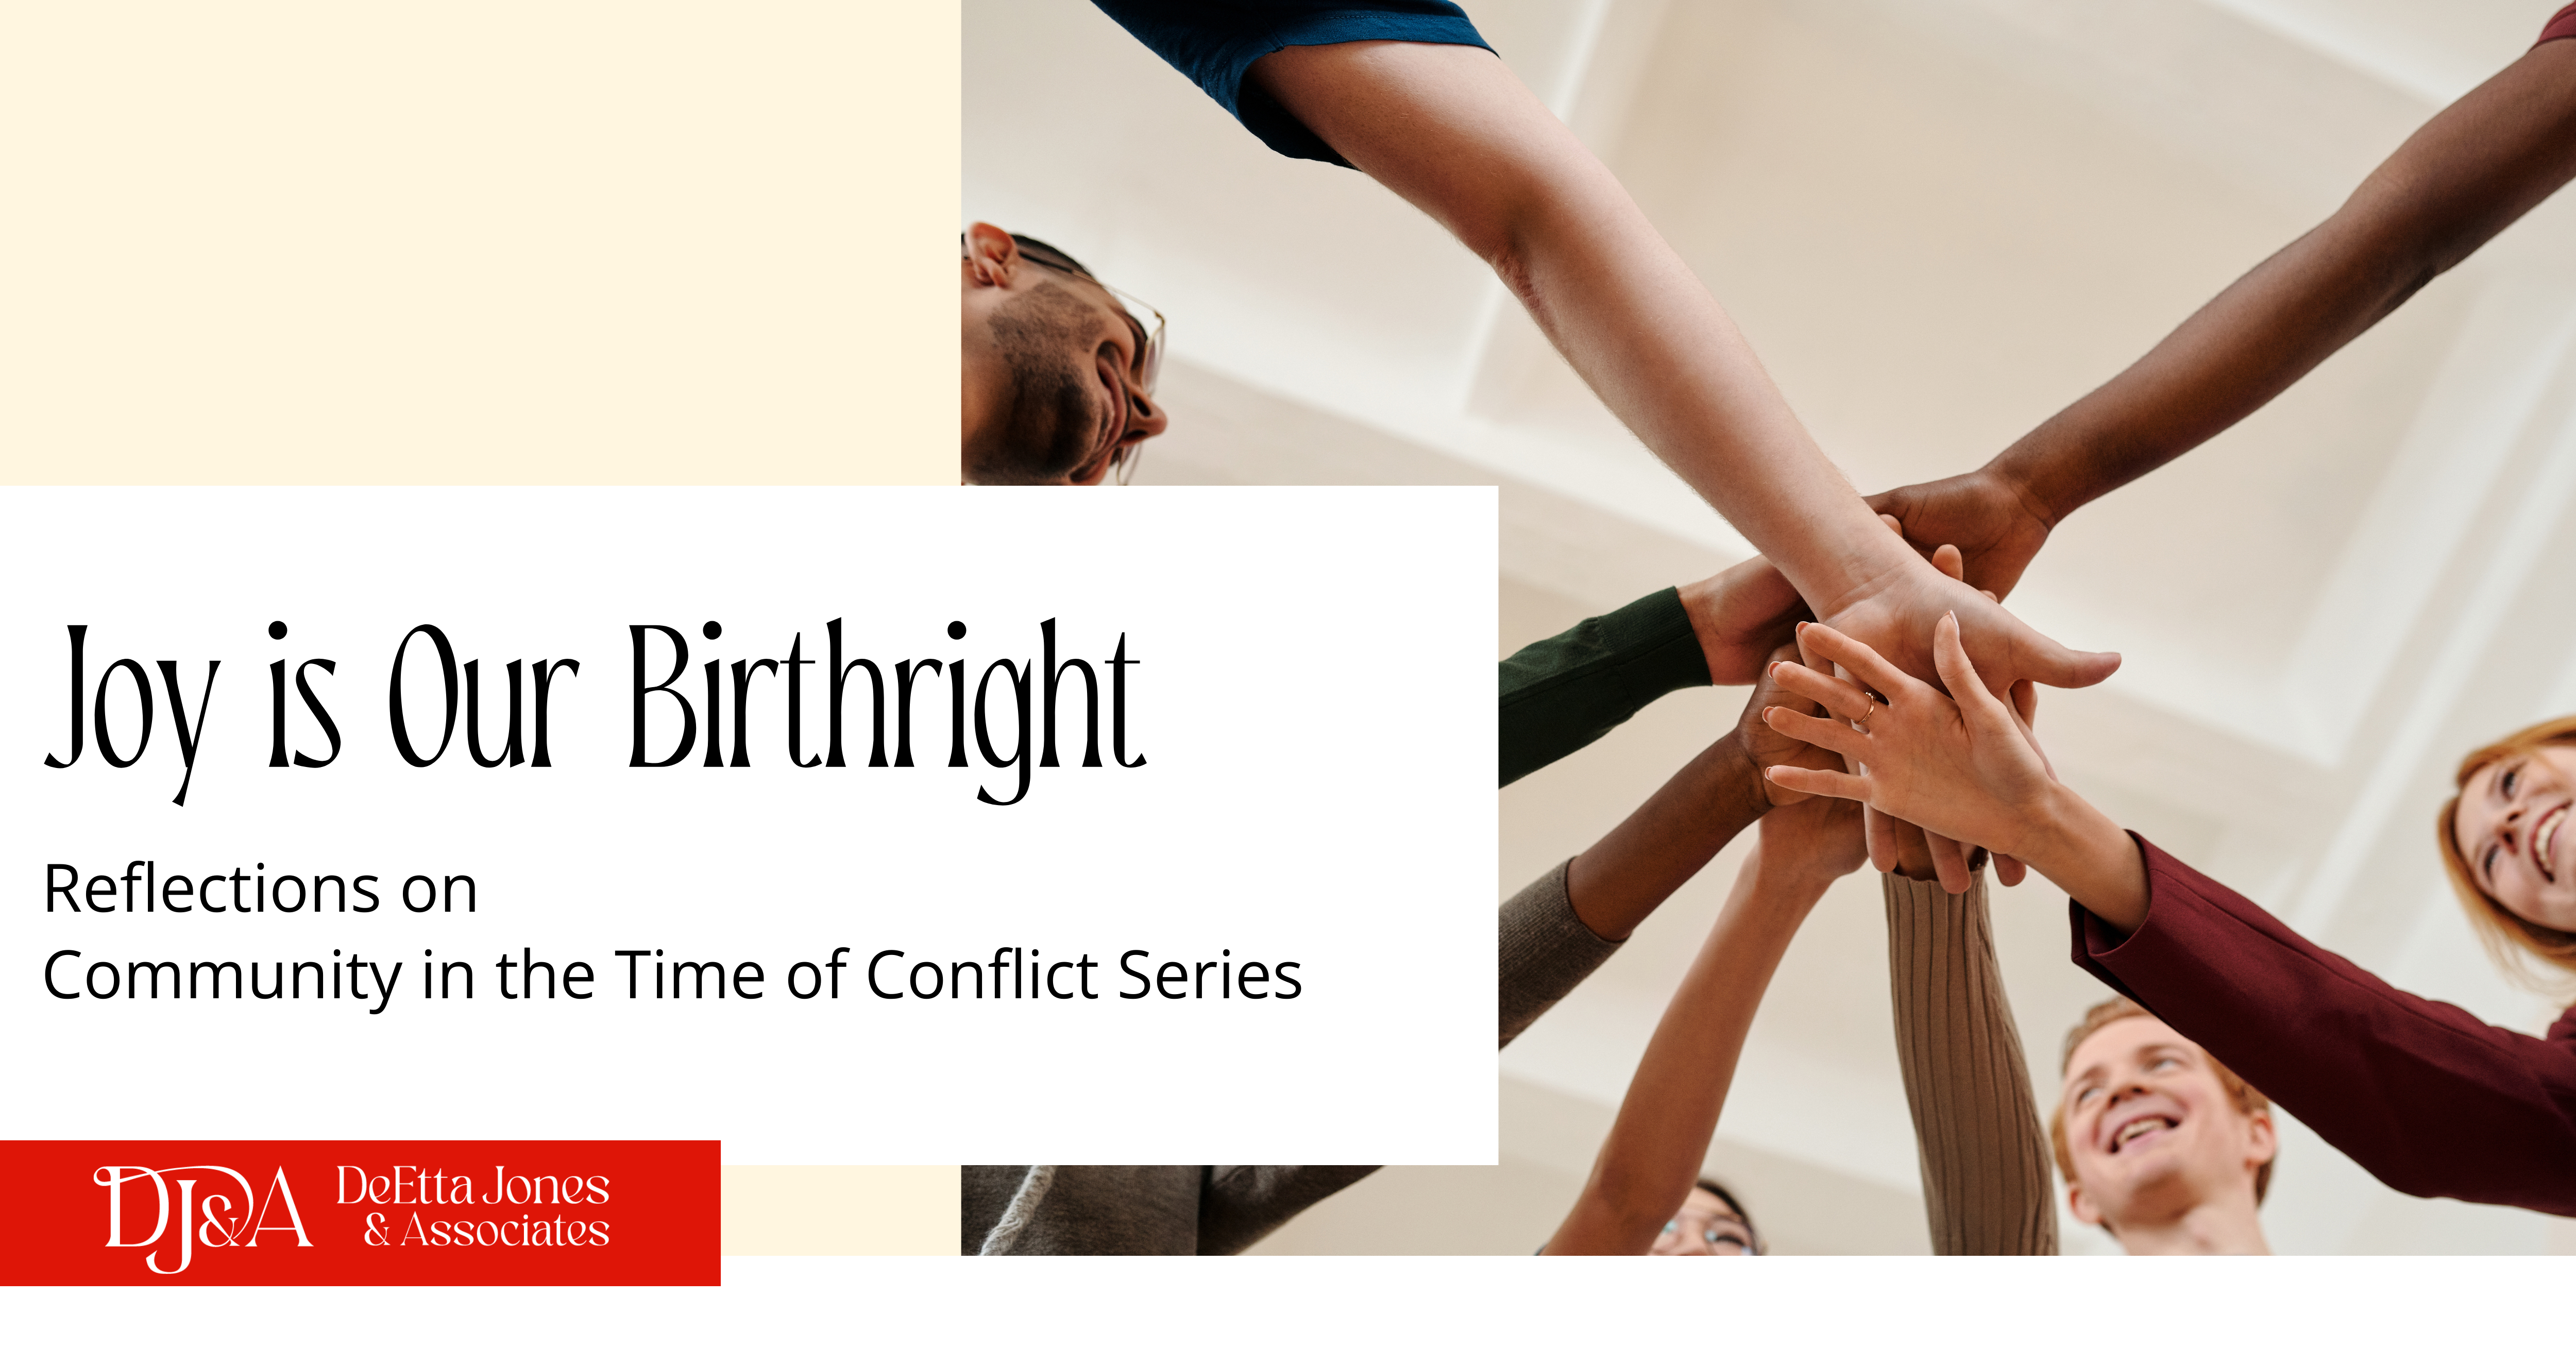 Joy is Our Birthright: Reflections on Community in the Time of Conflict Series